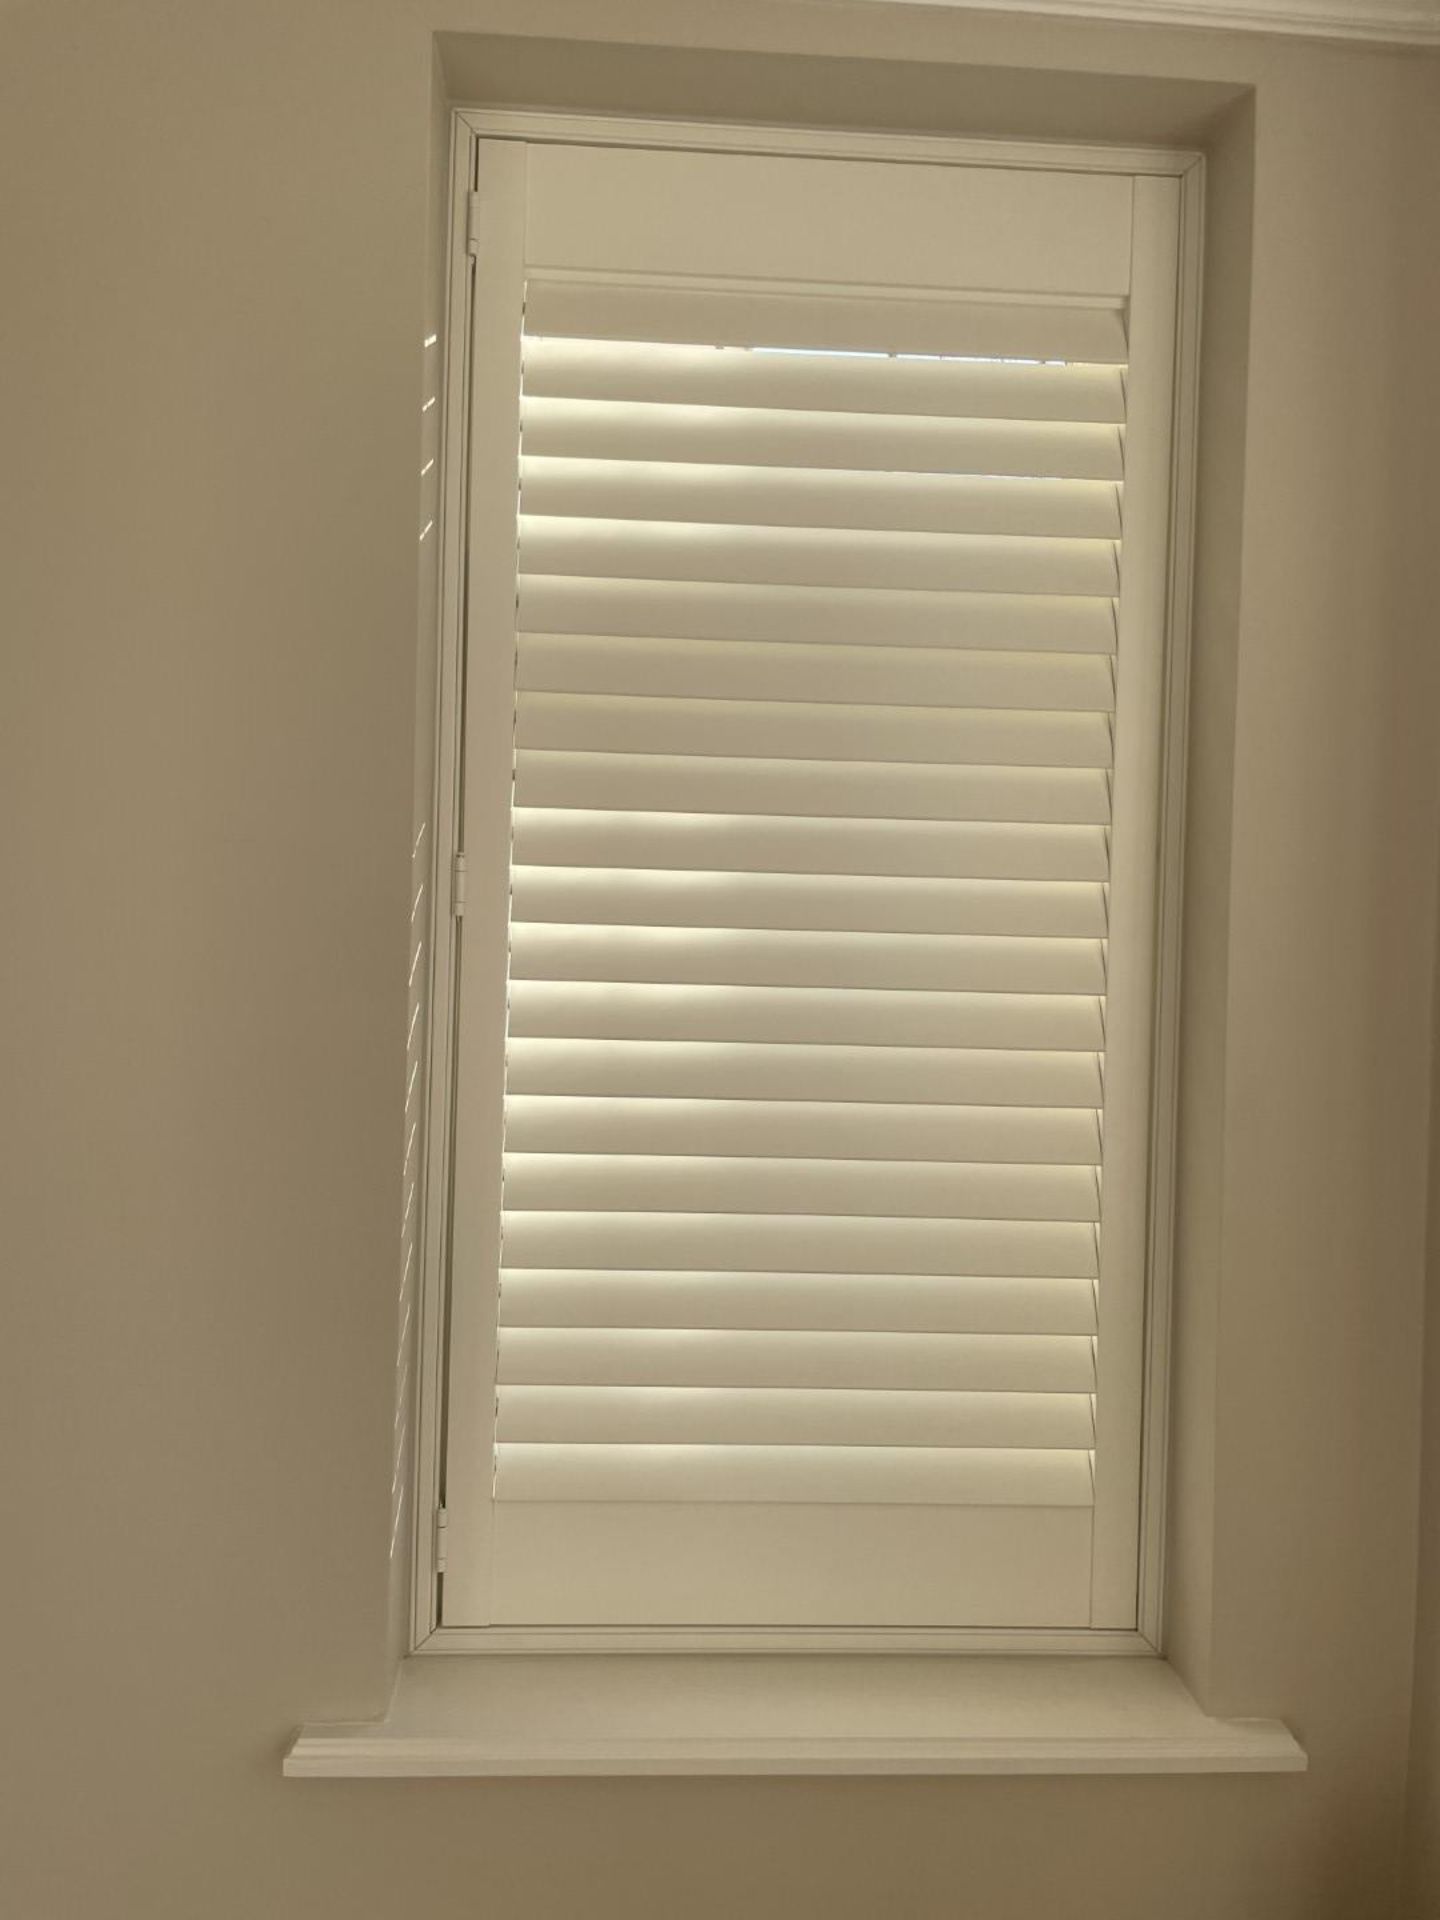 1 x Hardwood Timber Double Glazed Window Frames fitted with Shutter Blinds, In White - Ref: PAN106 - Image 13 of 23